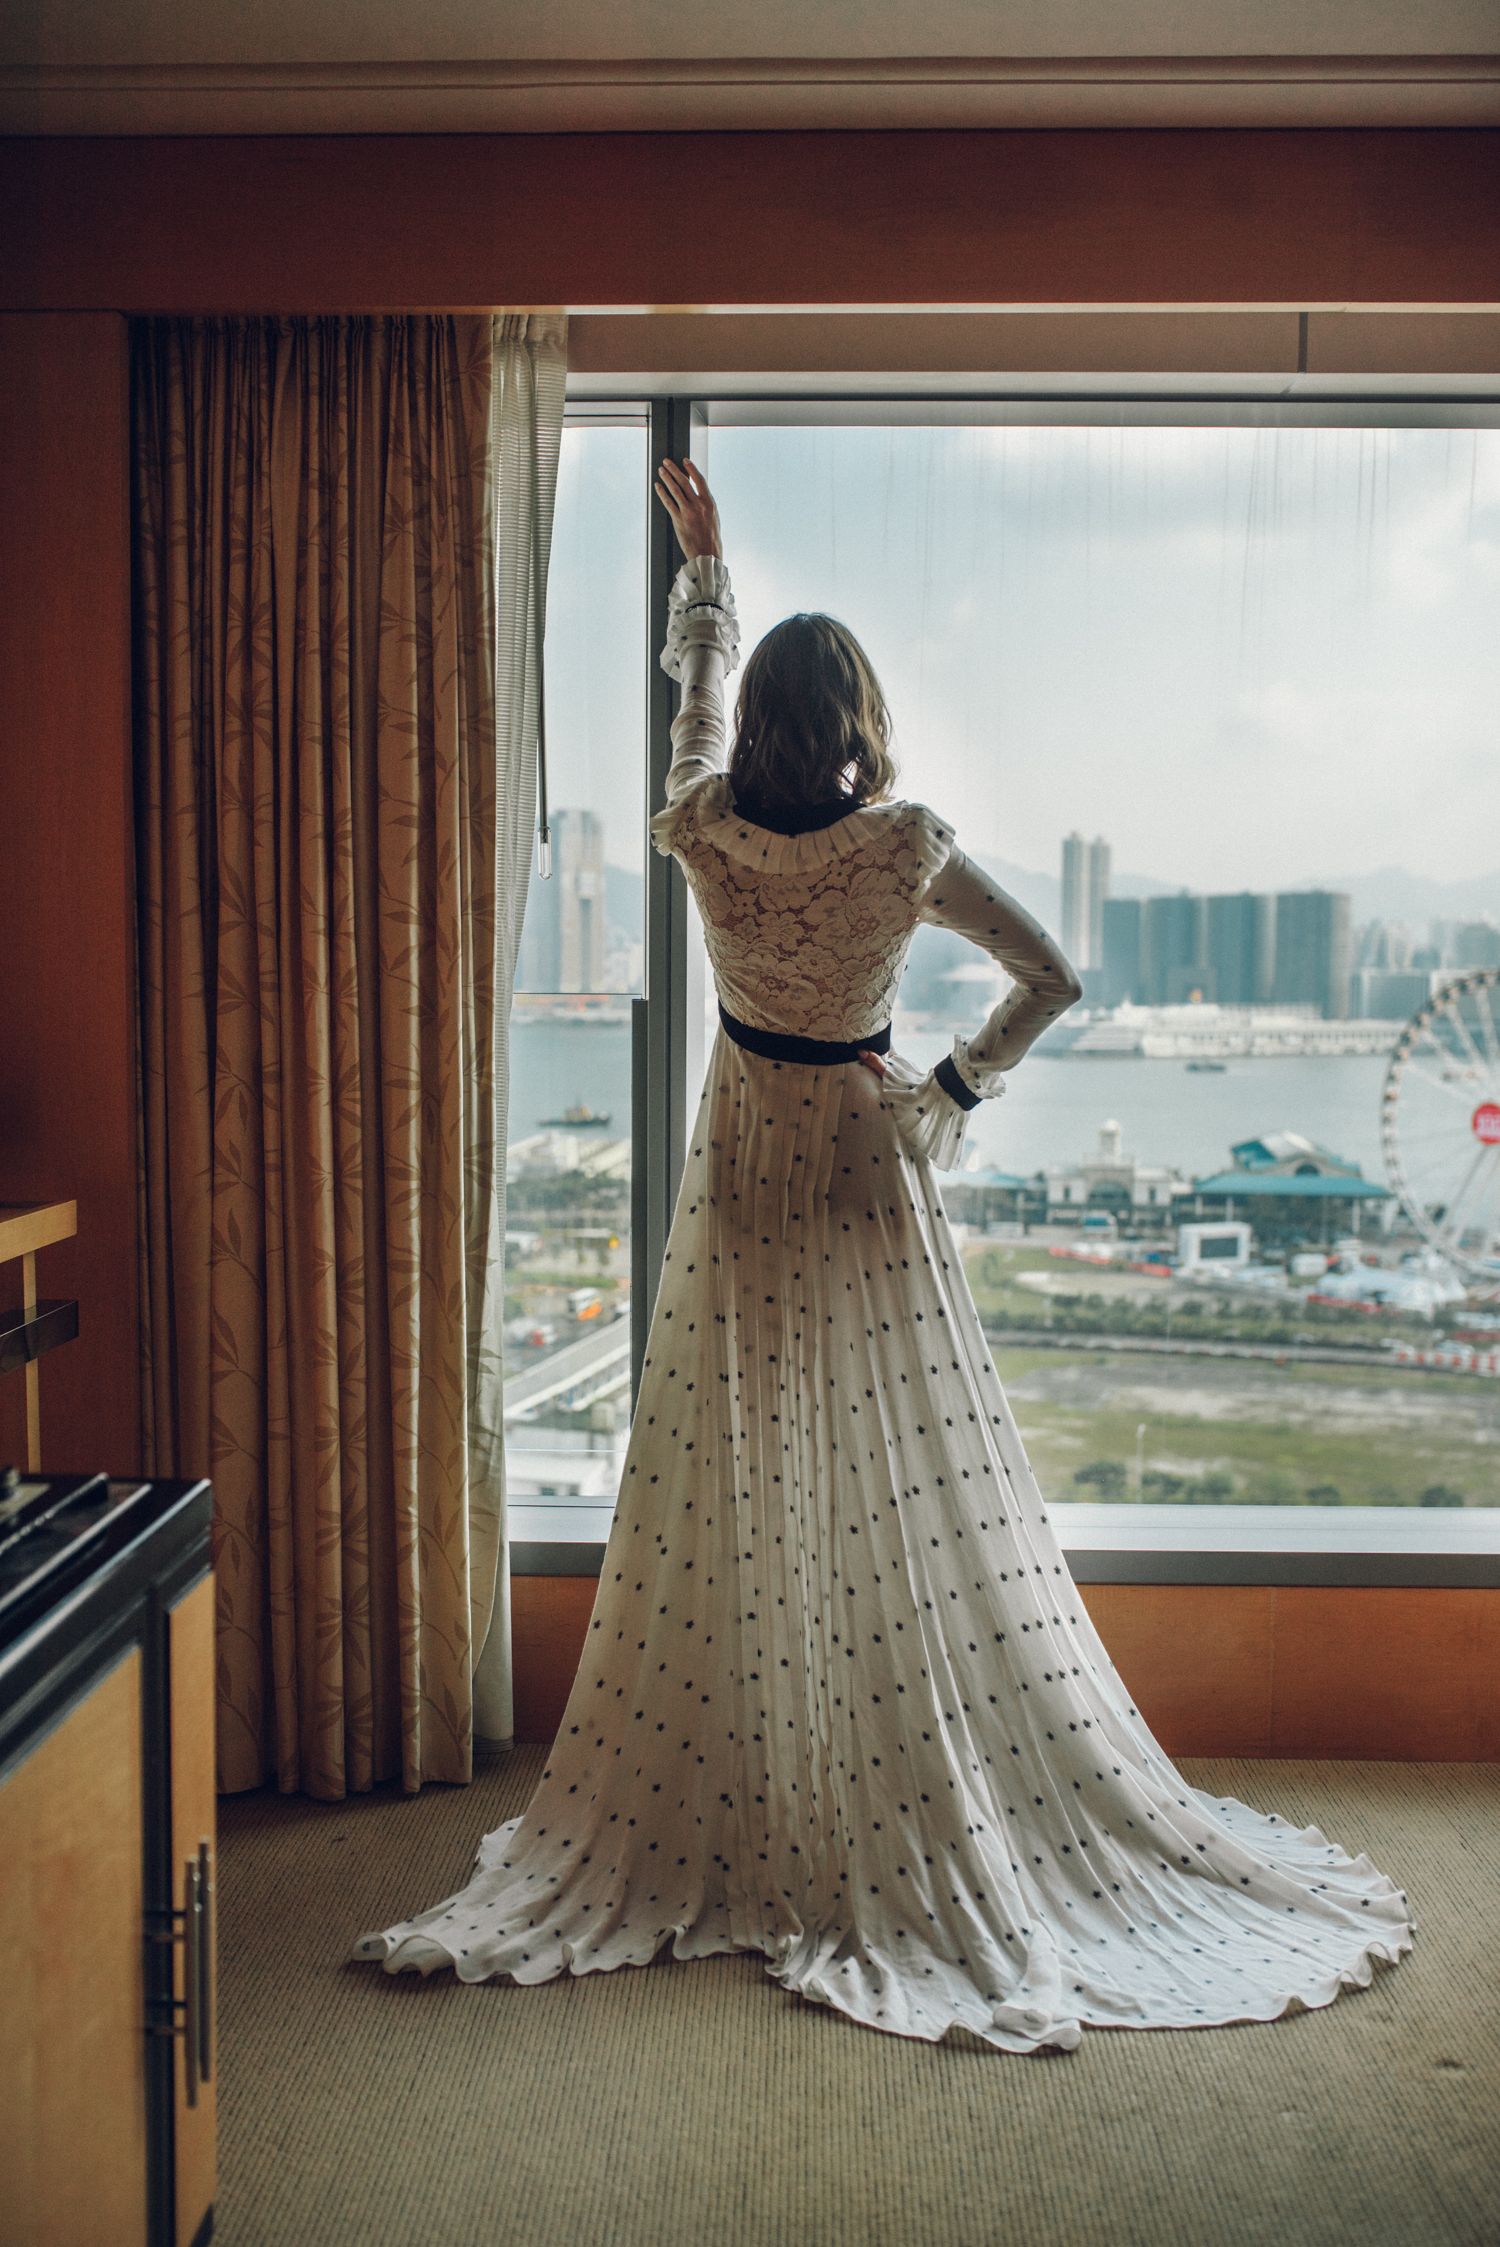 Miss USA 2011 Alyssa Campanella of The A List blog visits Mandarin Oriental Hong Kong wearing Philosophy di Lorenzo gown in the Meiji Suite